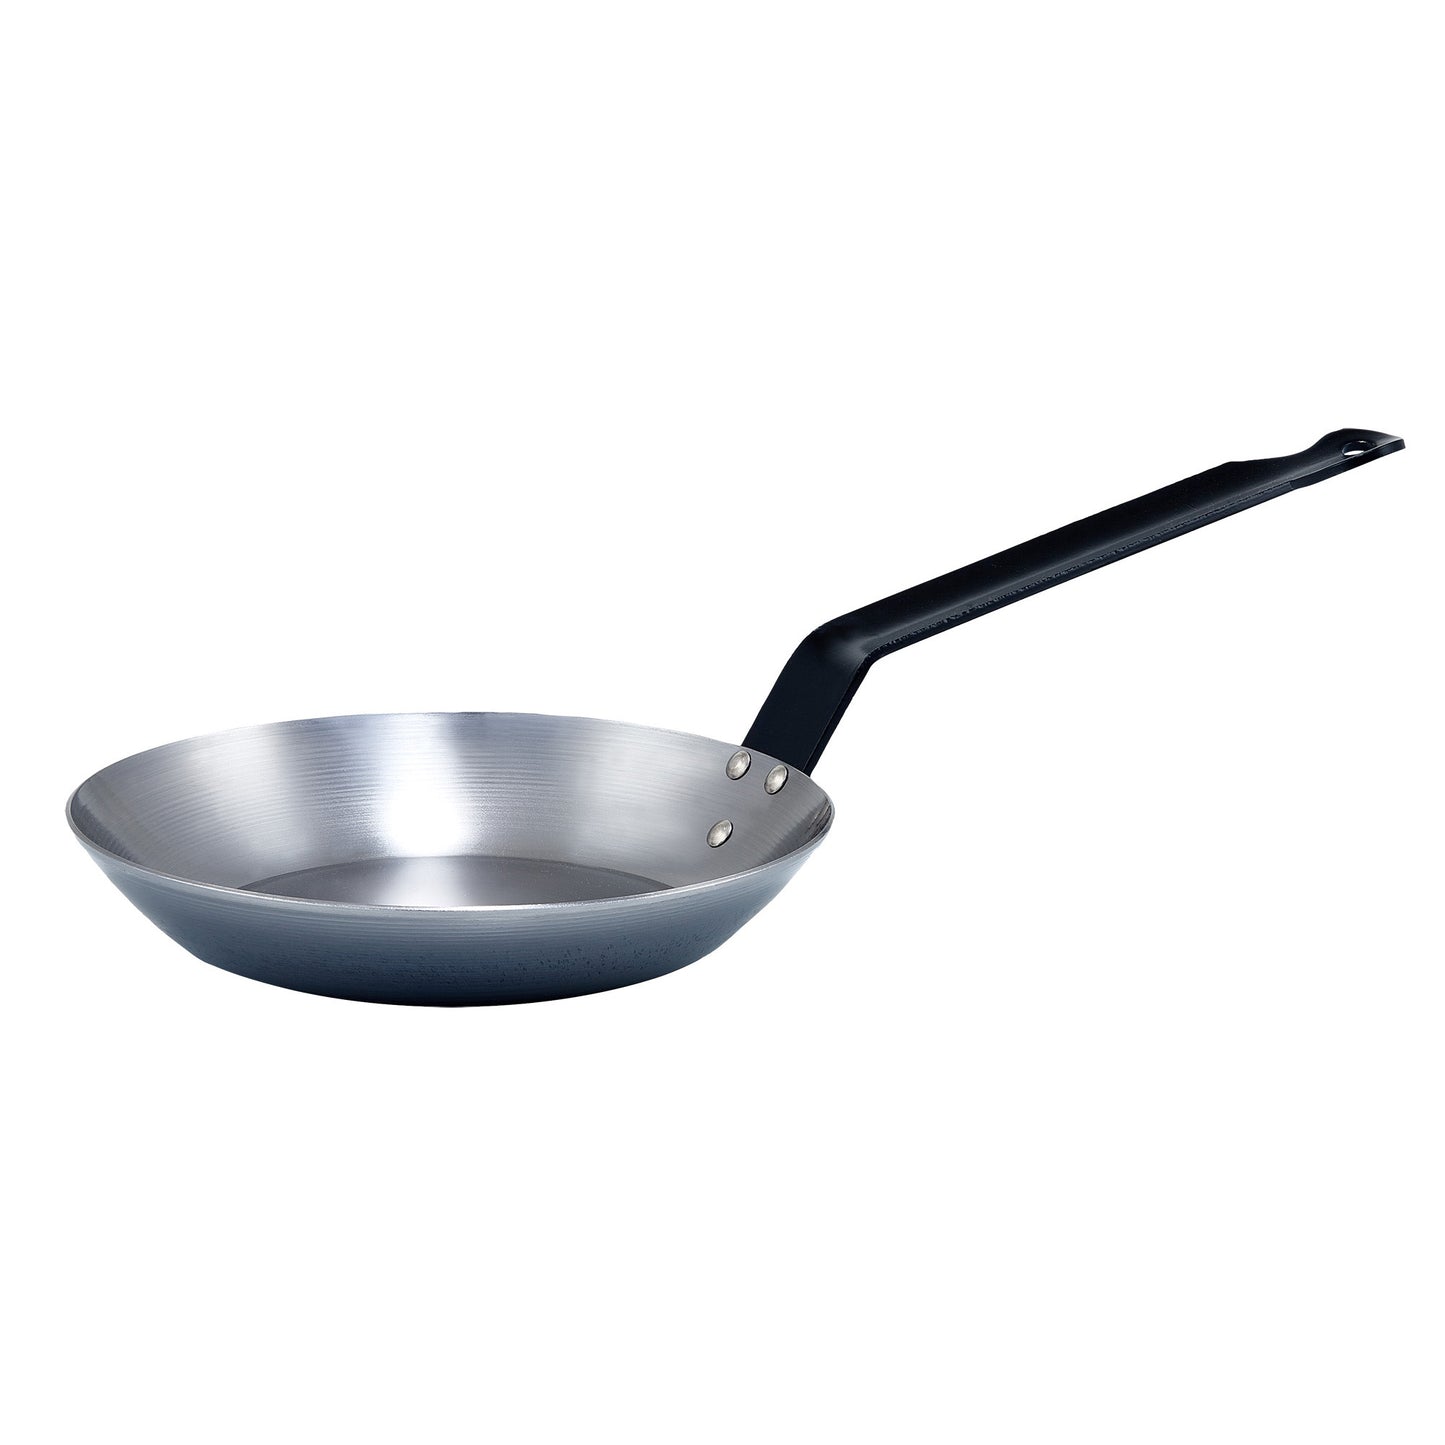 CSFP-9 - French Style Fry Pan, Polished Carbon Steel (Spain) - 9-1/2"